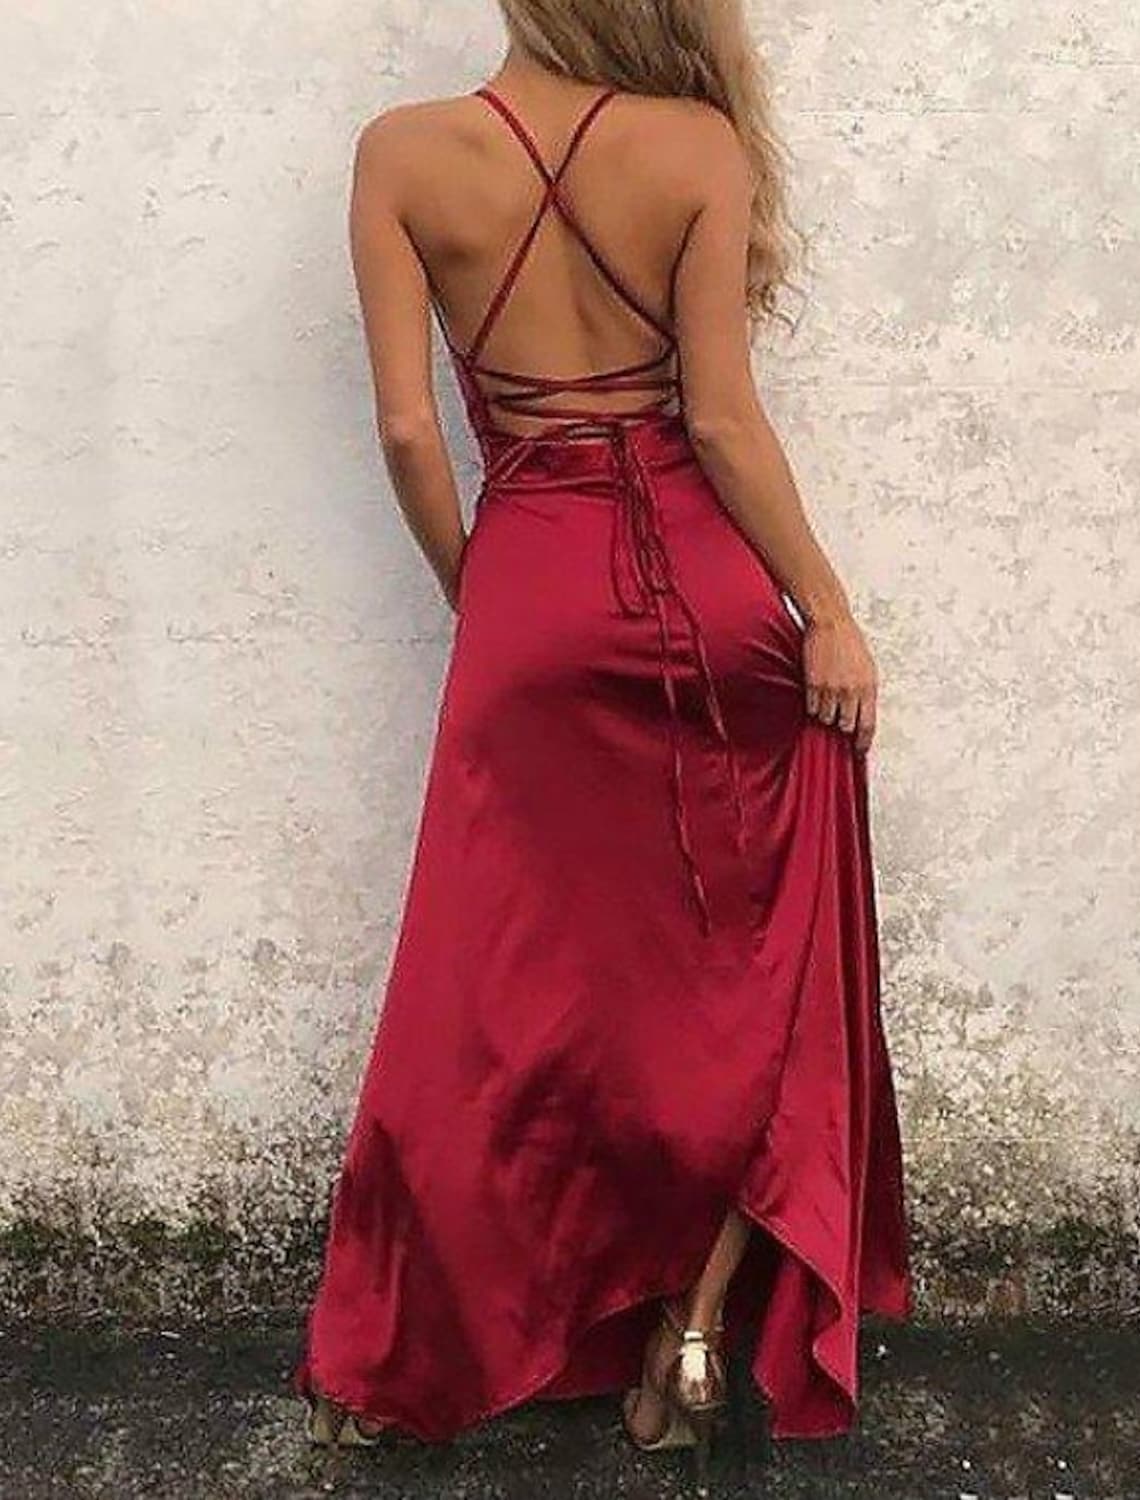 A-Line Beautiful Back Sexy High Split Engagement Prom Formal Evening Dress Strap Sleeveless Floor Length Satin with Ruffles Slit